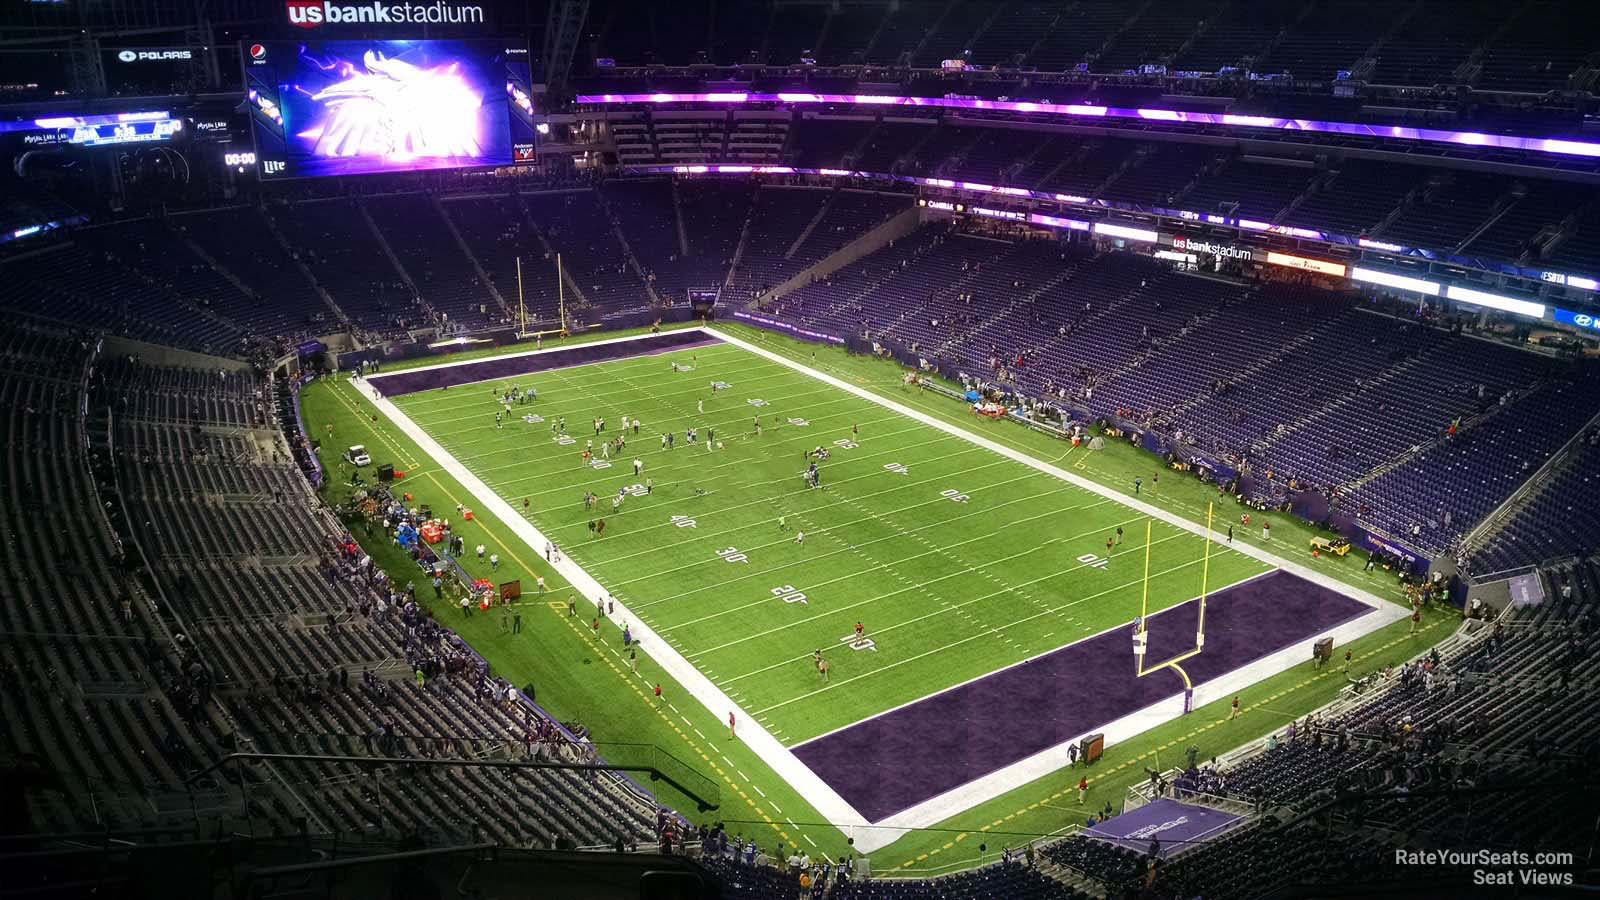 section 332, row 11 seat view  for football - u.s. bank stadium